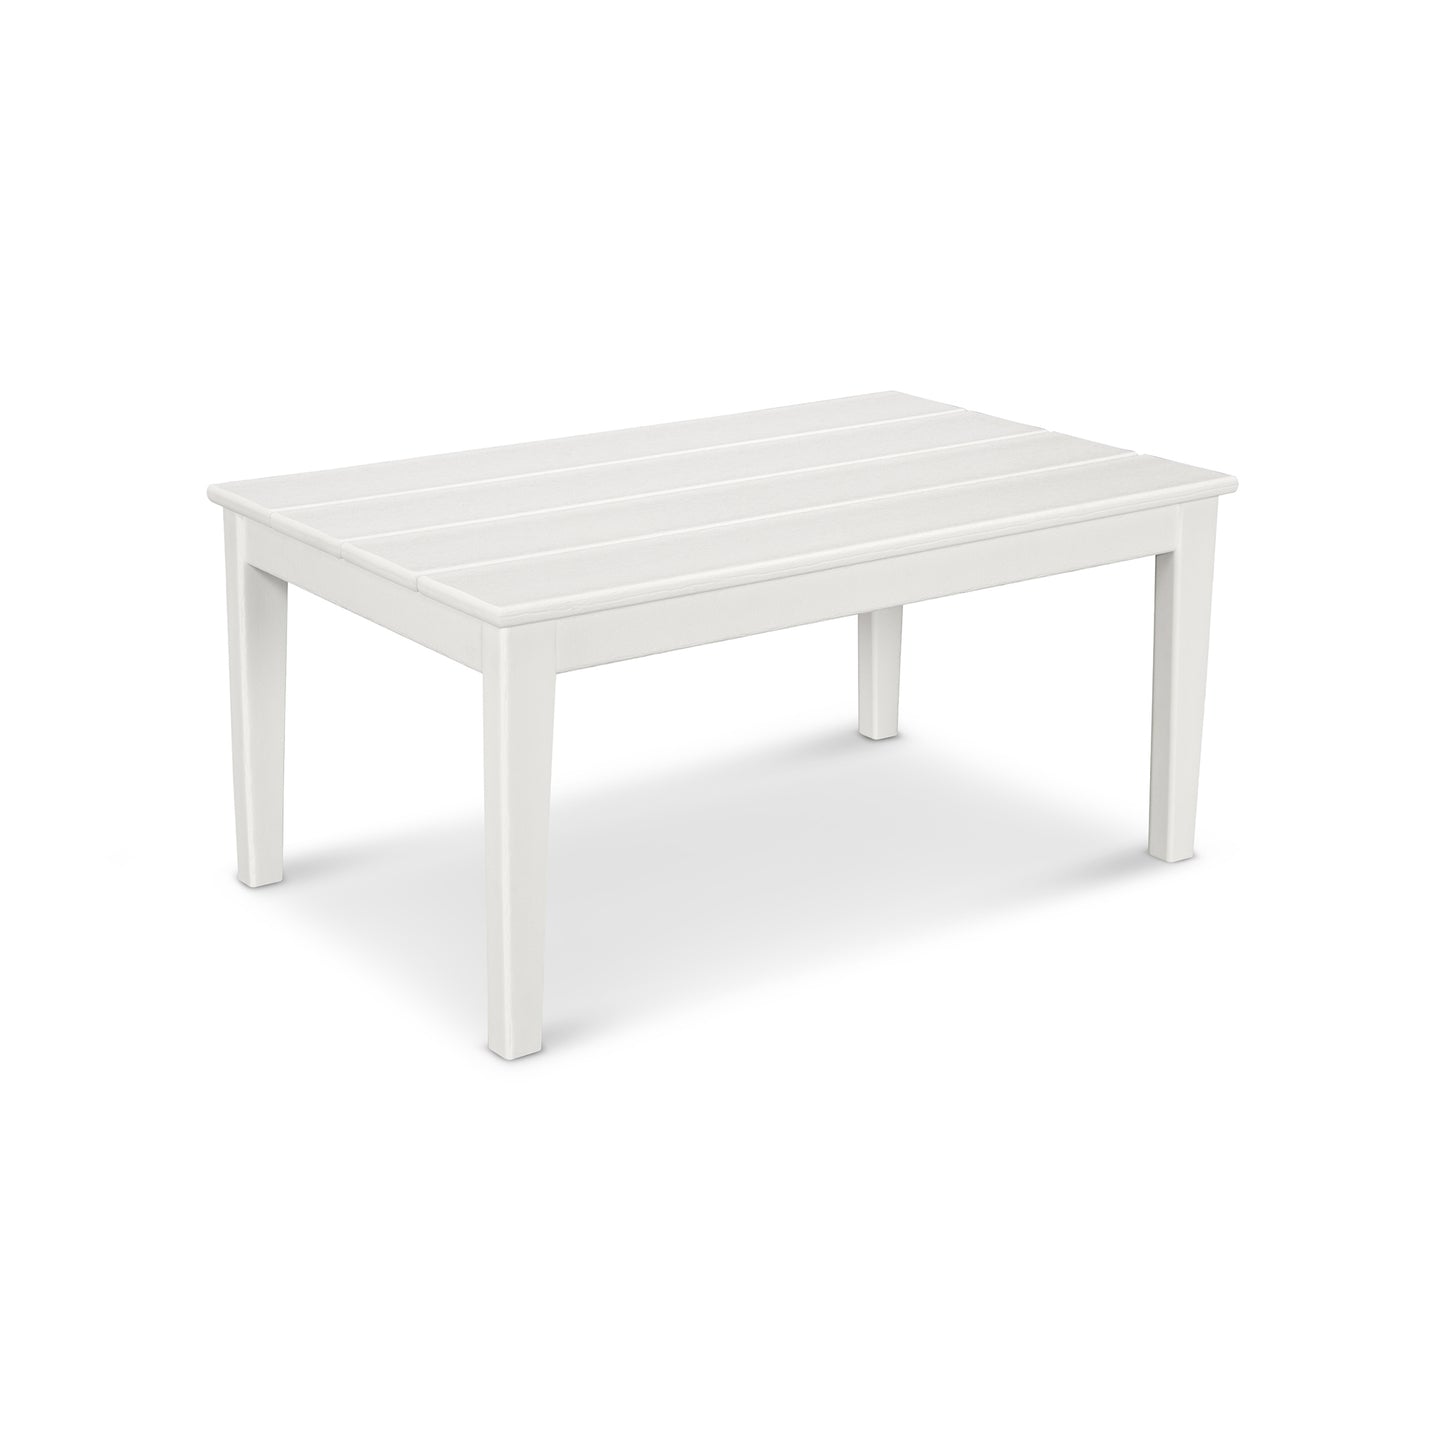 A simple white rectangular POLYWOOD® Newport 22"x36" Coffee Table with four legs, presented on a plain white background. The table has a slightly textured surface and clean, straight lines.